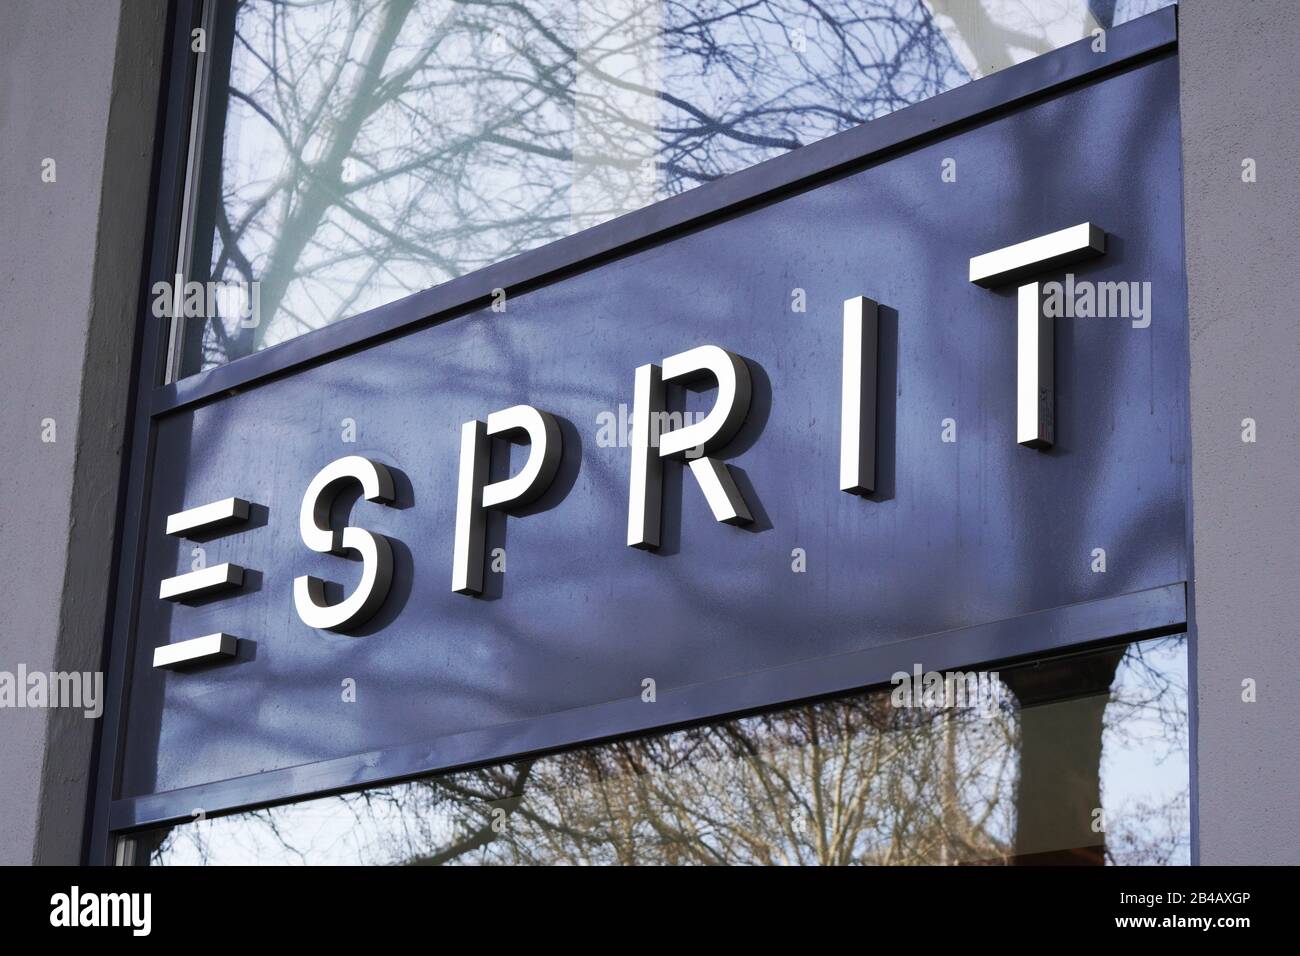 Esprit brand name sign at local fashion retail store in Hannover, Germany  on March 2, 2020 Stock Photo - Alamy